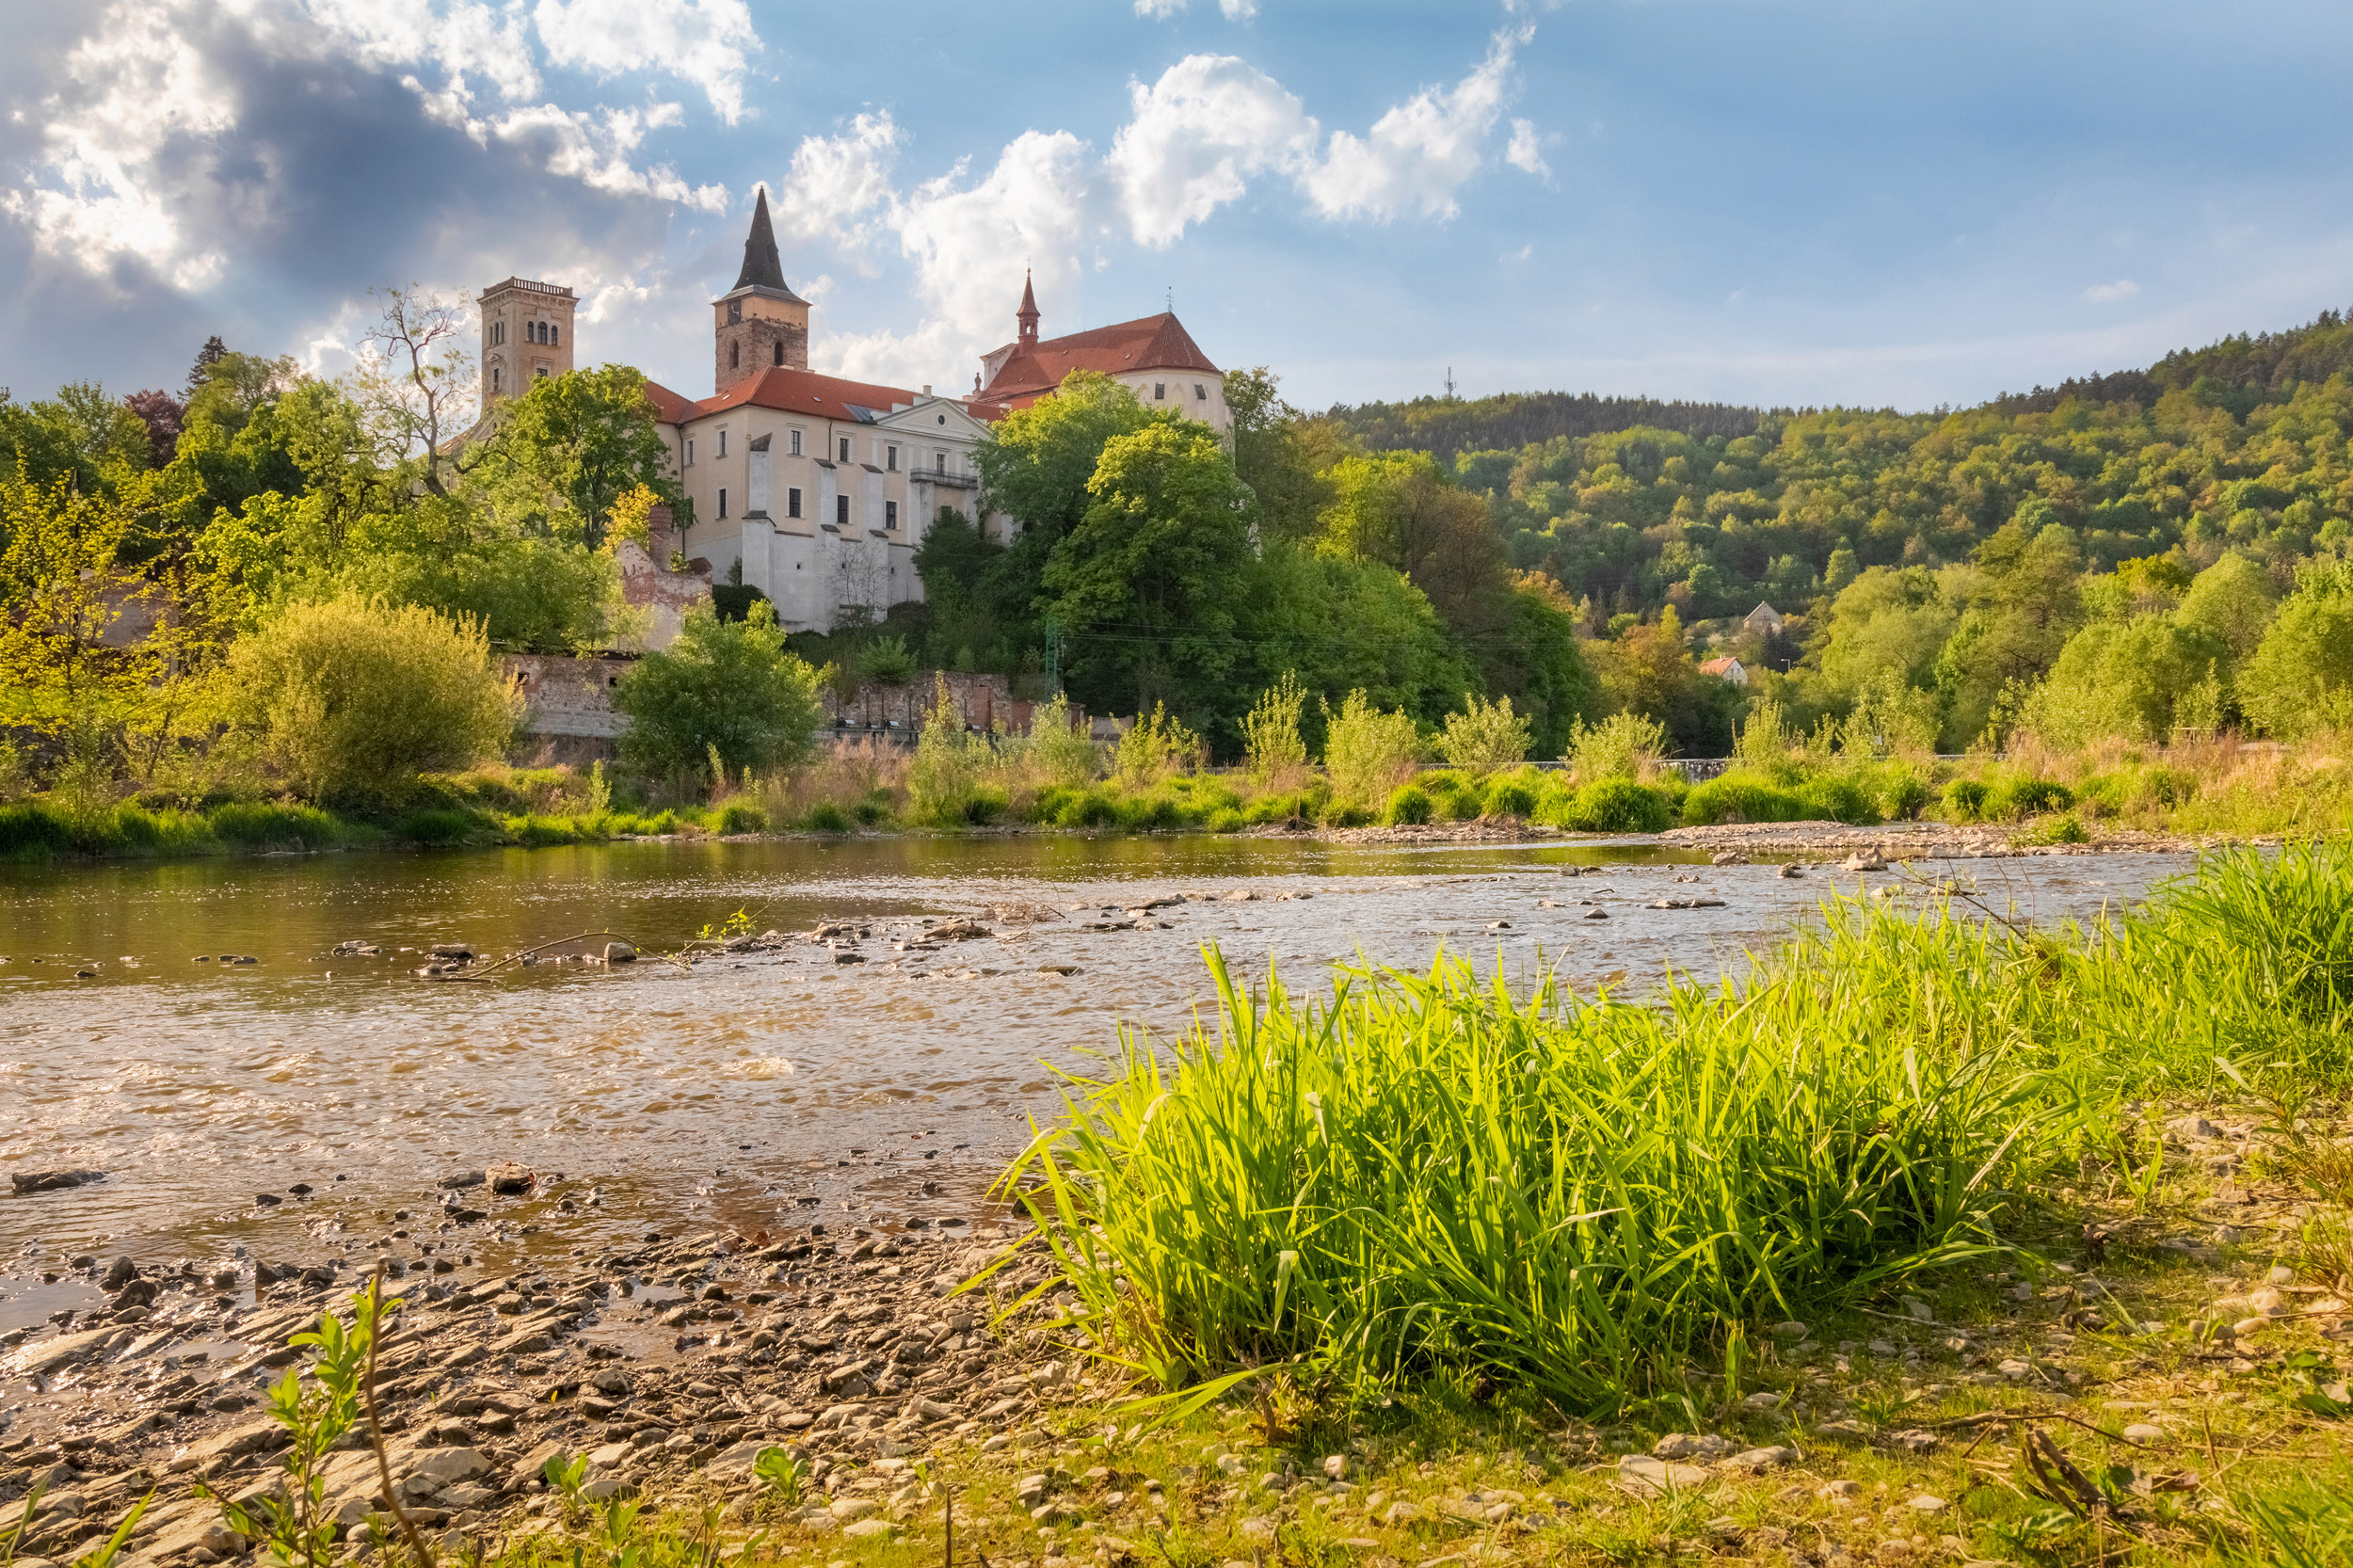 Sunny day in Sazava monastery with grass and river foreground, C